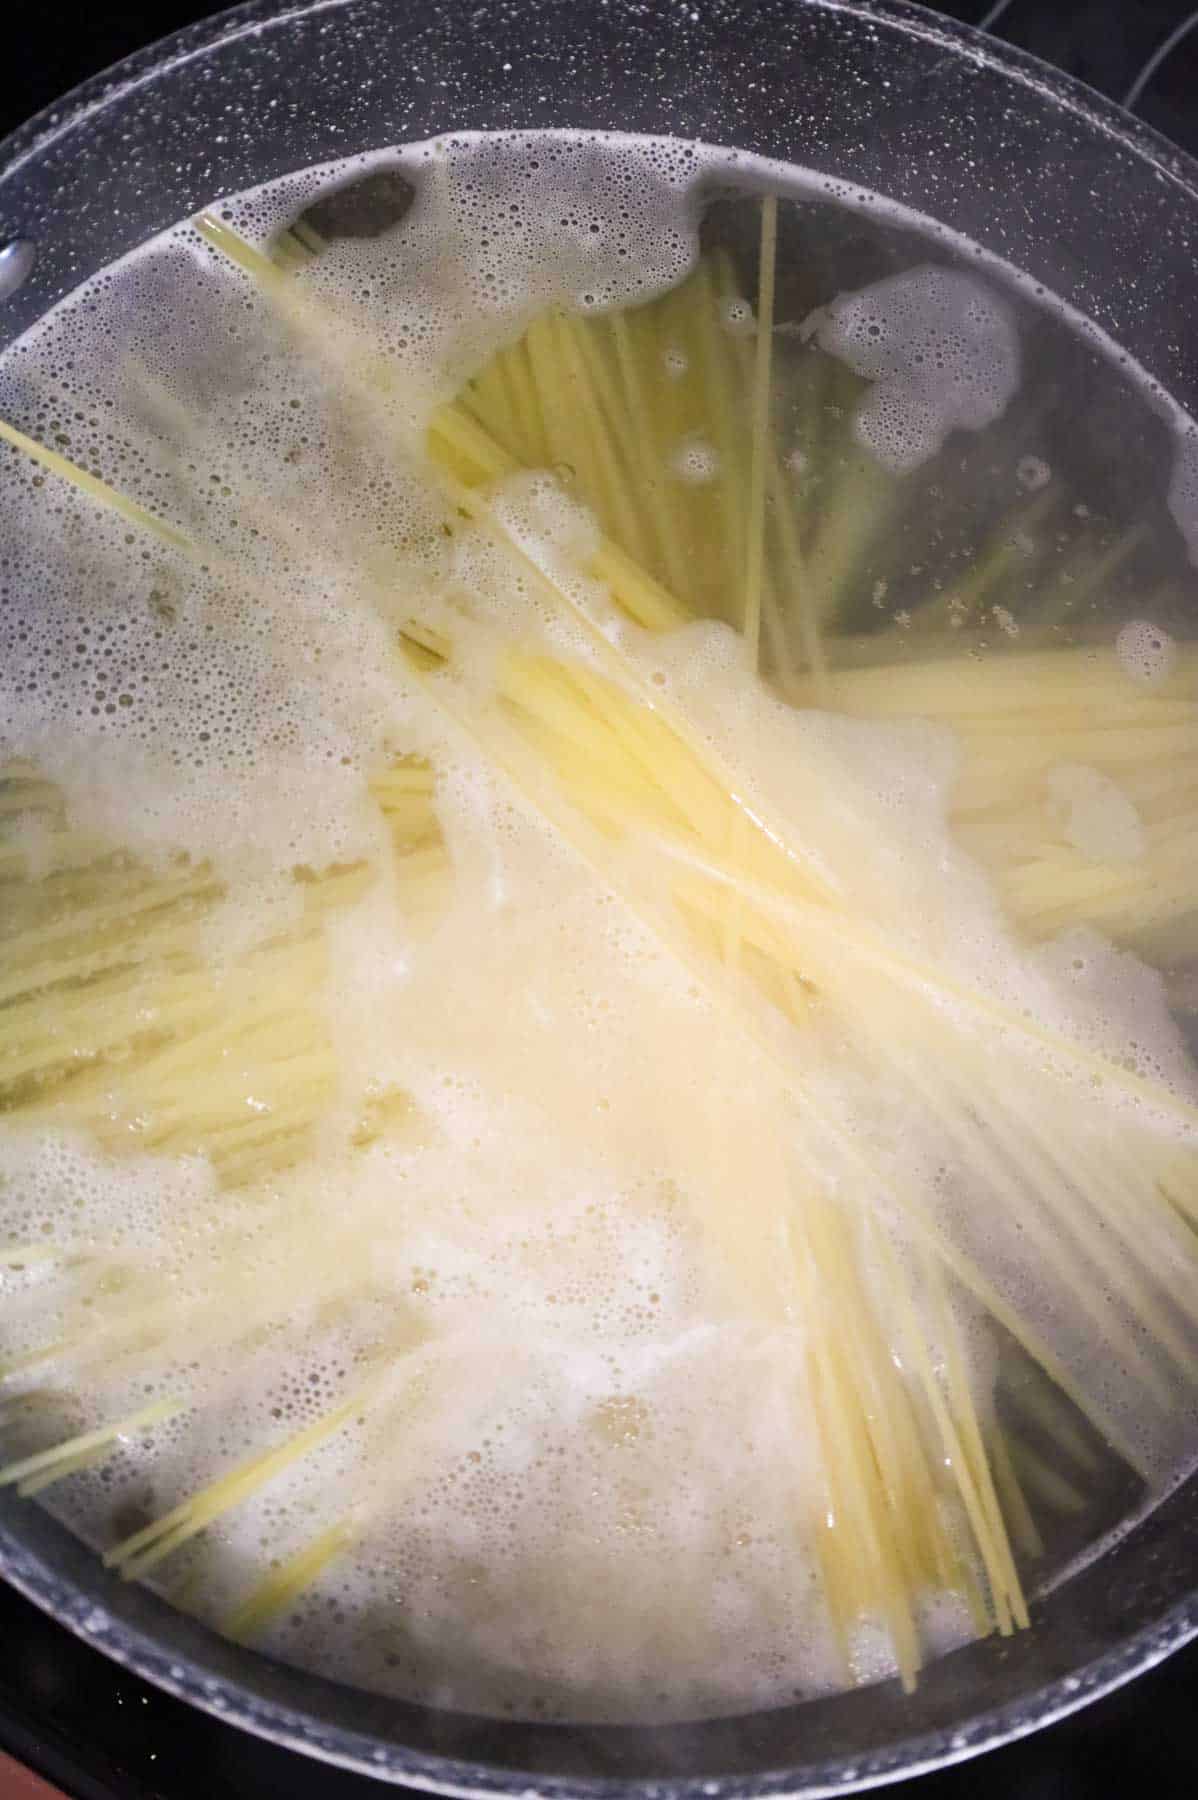 spaghetti noodles cooking in a pot of water